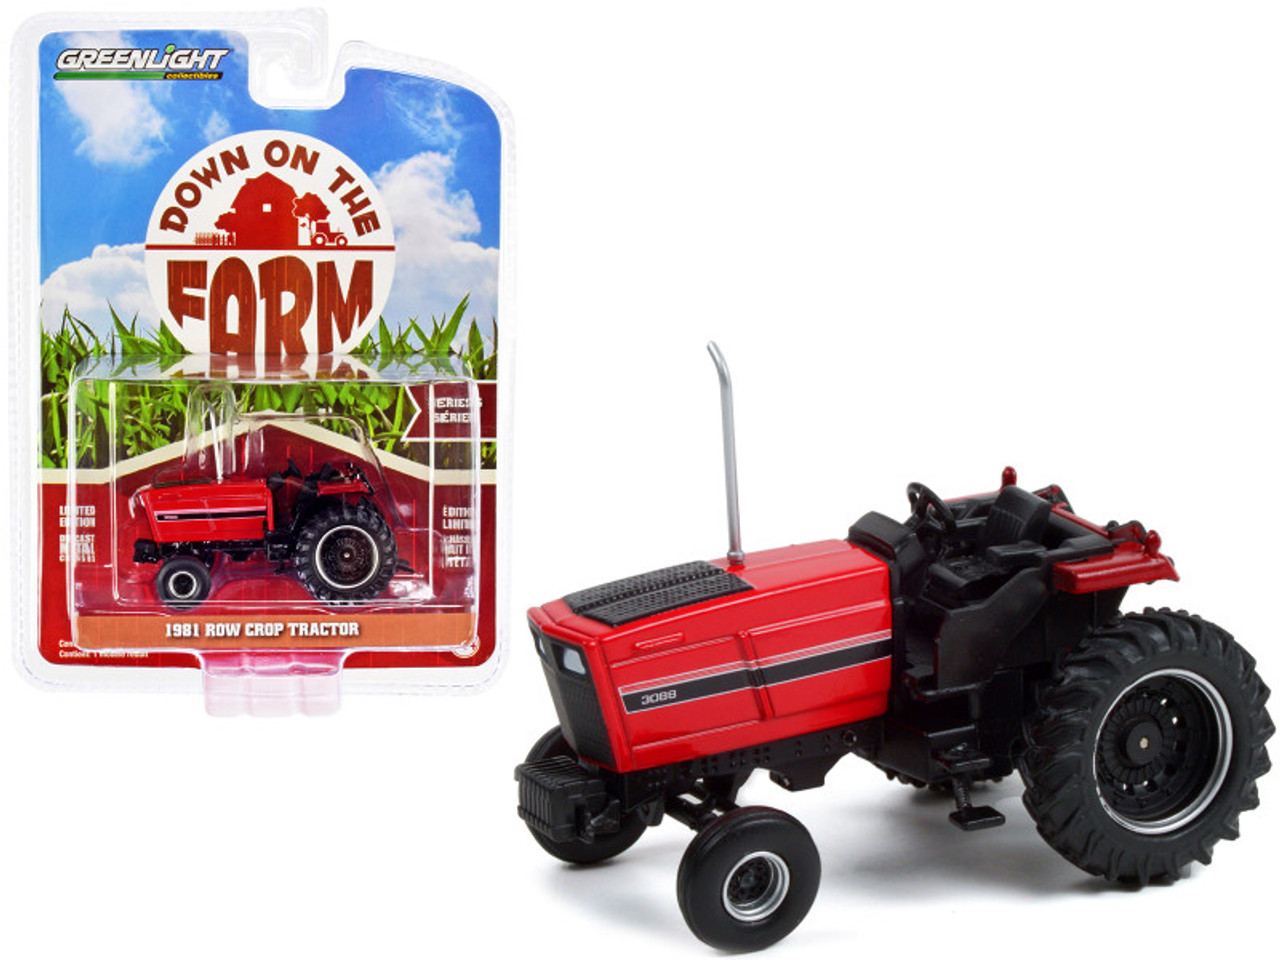 1981 3088 Row Crop Tractor Red with Black Stripes "Down on the Farm" Series 6 1/64 Diecast Model by Greenlight